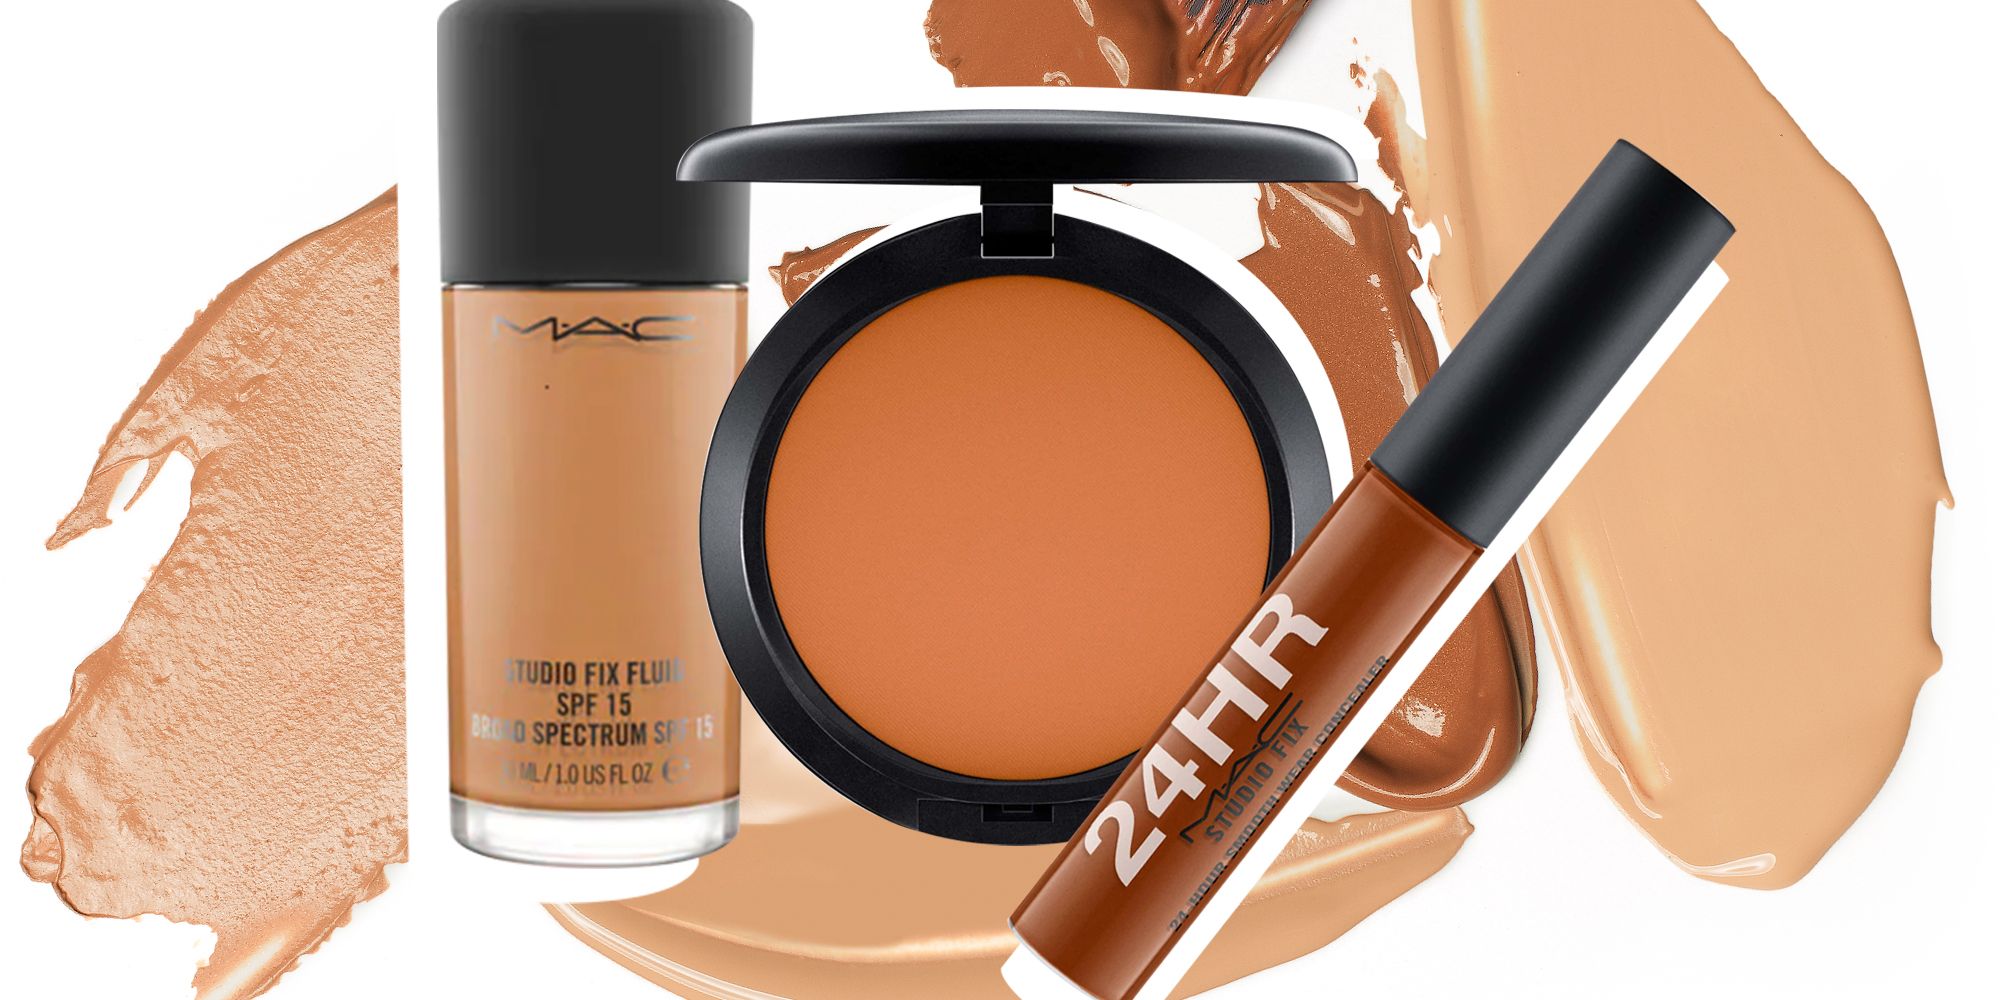 Zealot Decode indad M.A.C. Cosmetics Expanded Their Studio Fix Foundation and Concealer Shade  Range